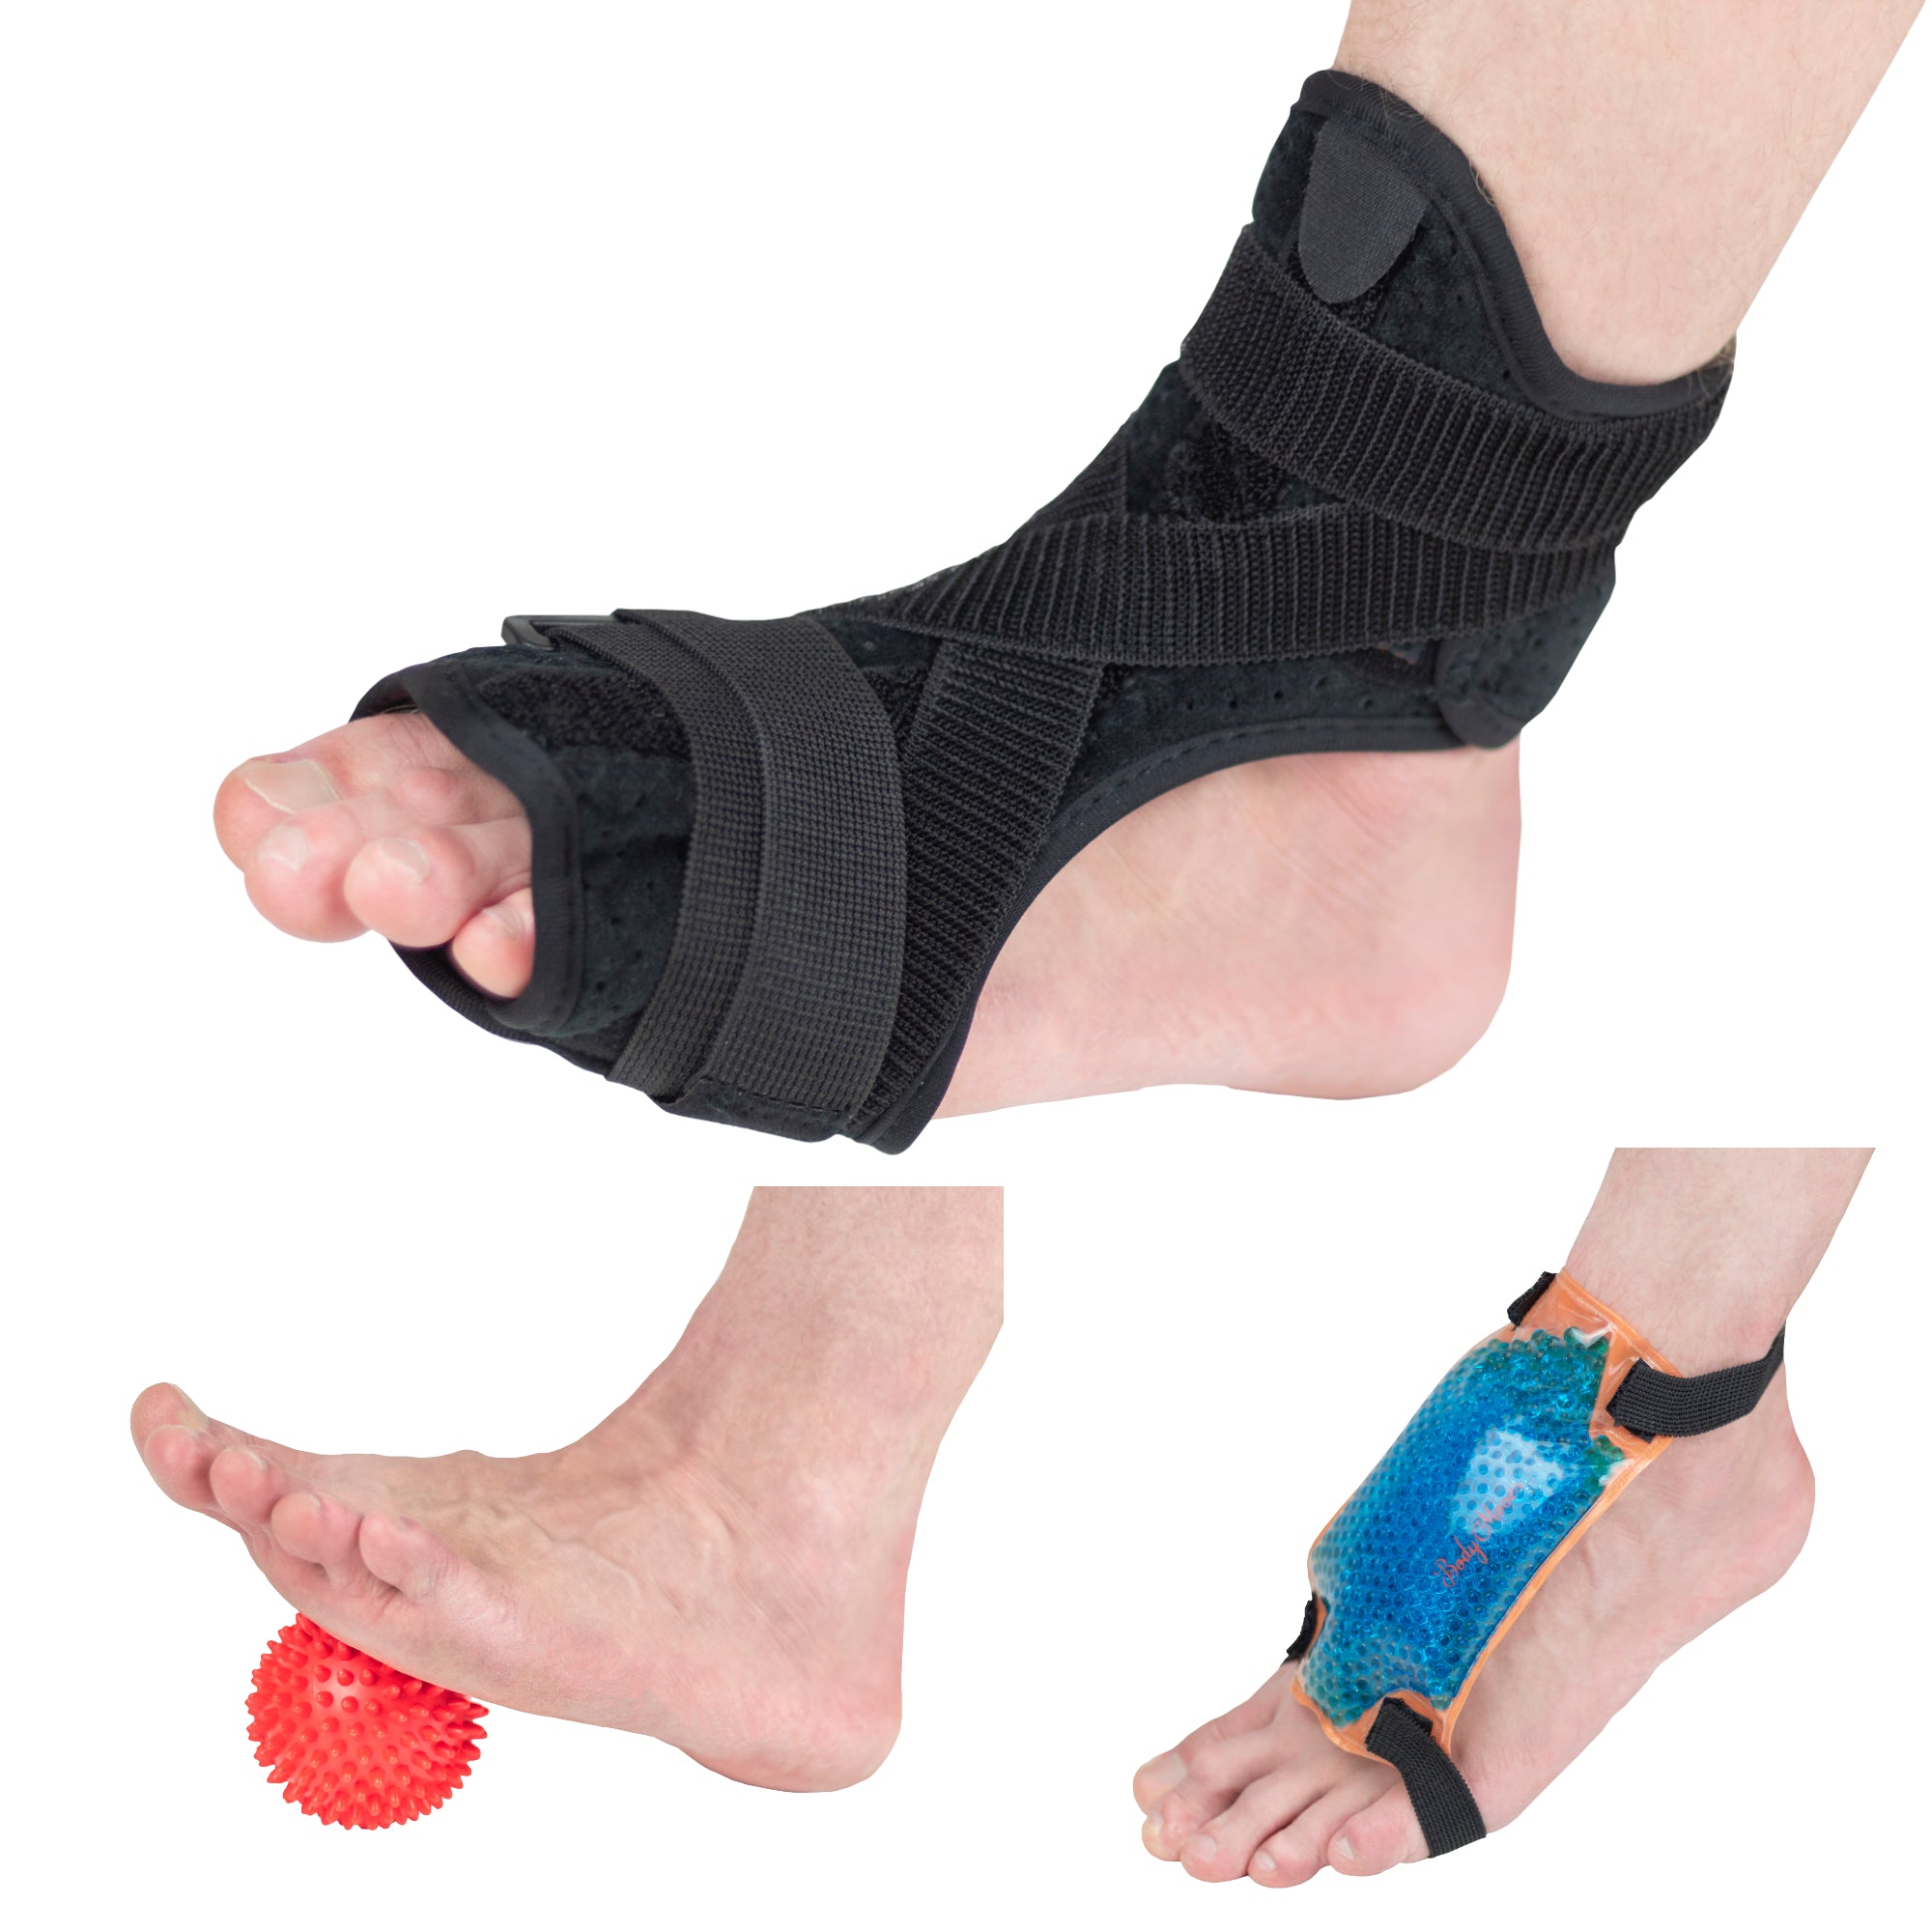 Plantar Fasciitis night Splint plus Spiky Ball plus Hot and Cold Pack –  BodyMovesPro